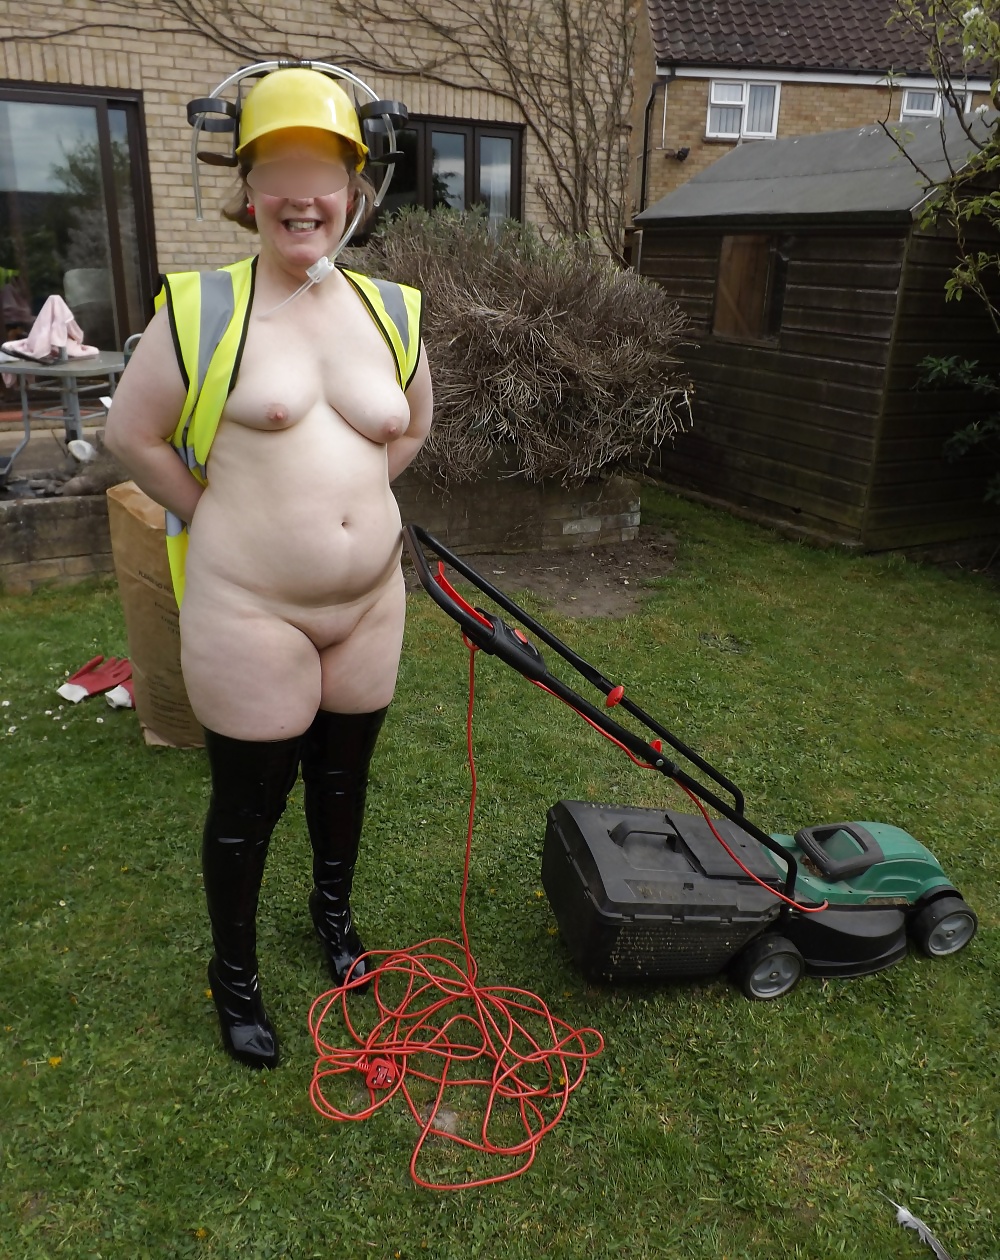 Mowing the lawn in PVC thigh boots #18903397